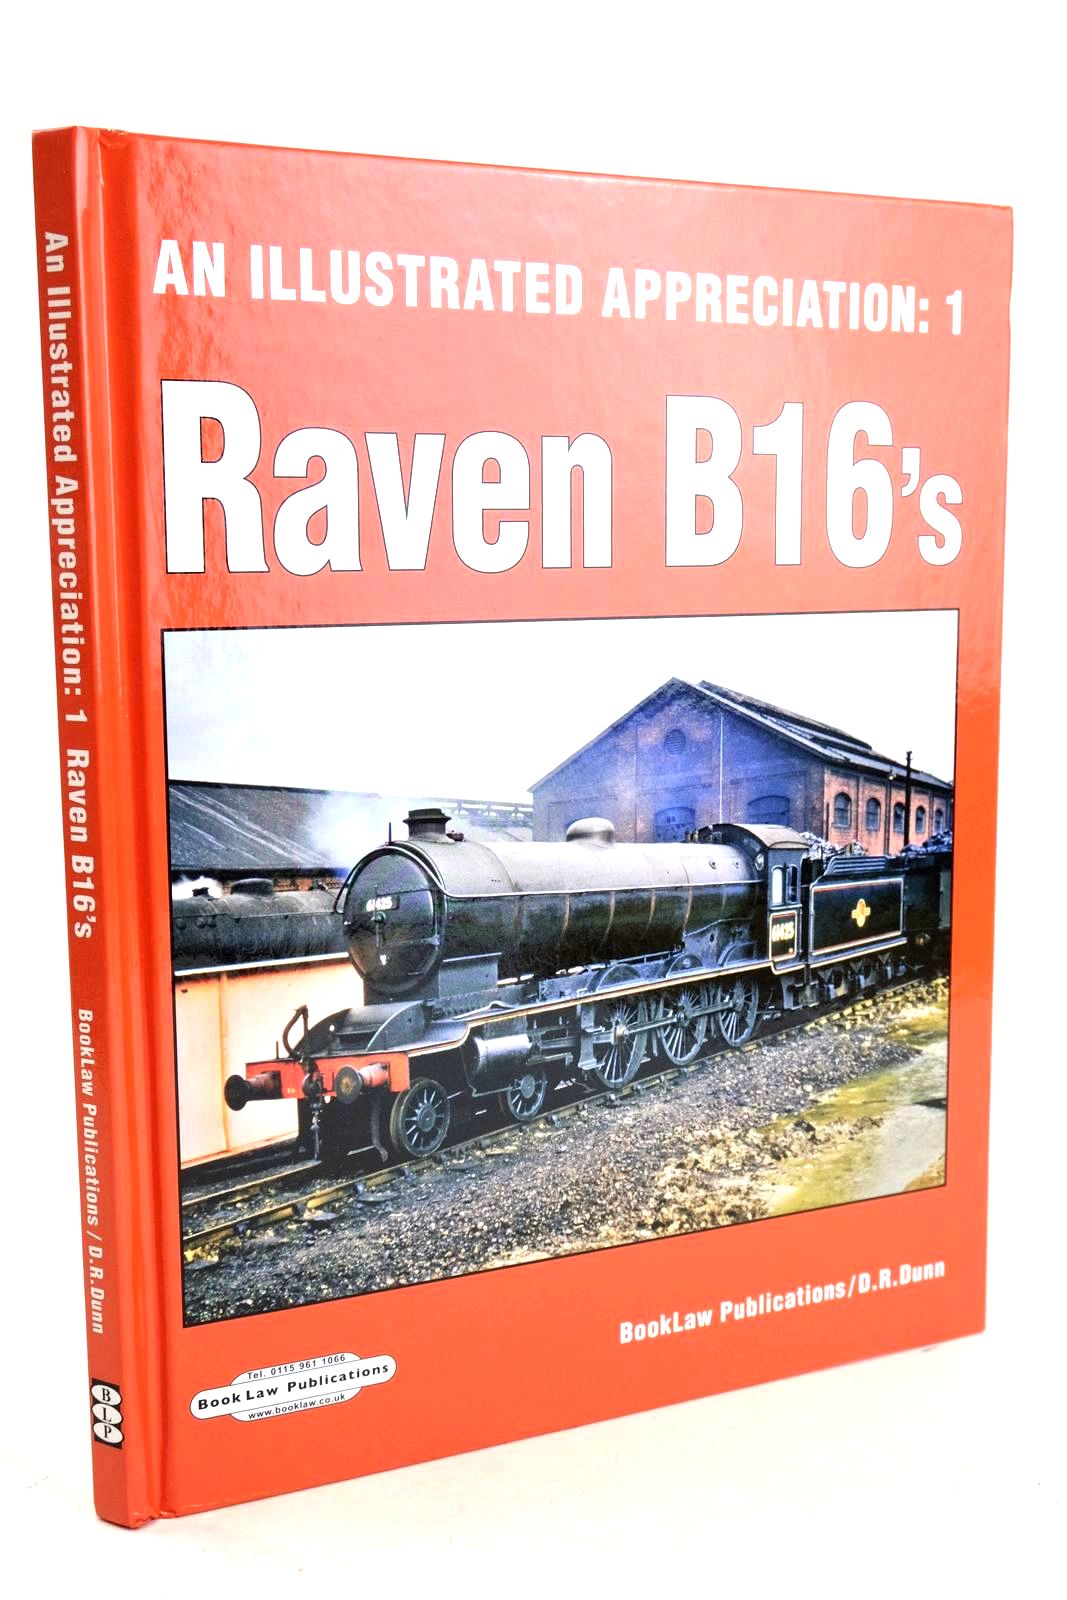 Photo of AN ILLUSTRATED APPRECIATION: 1 RAVEN B16'S written by Allen, David Dunne, David published by Book Law Publications (STOCK CODE: 1327314)  for sale by Stella & Rose's Books